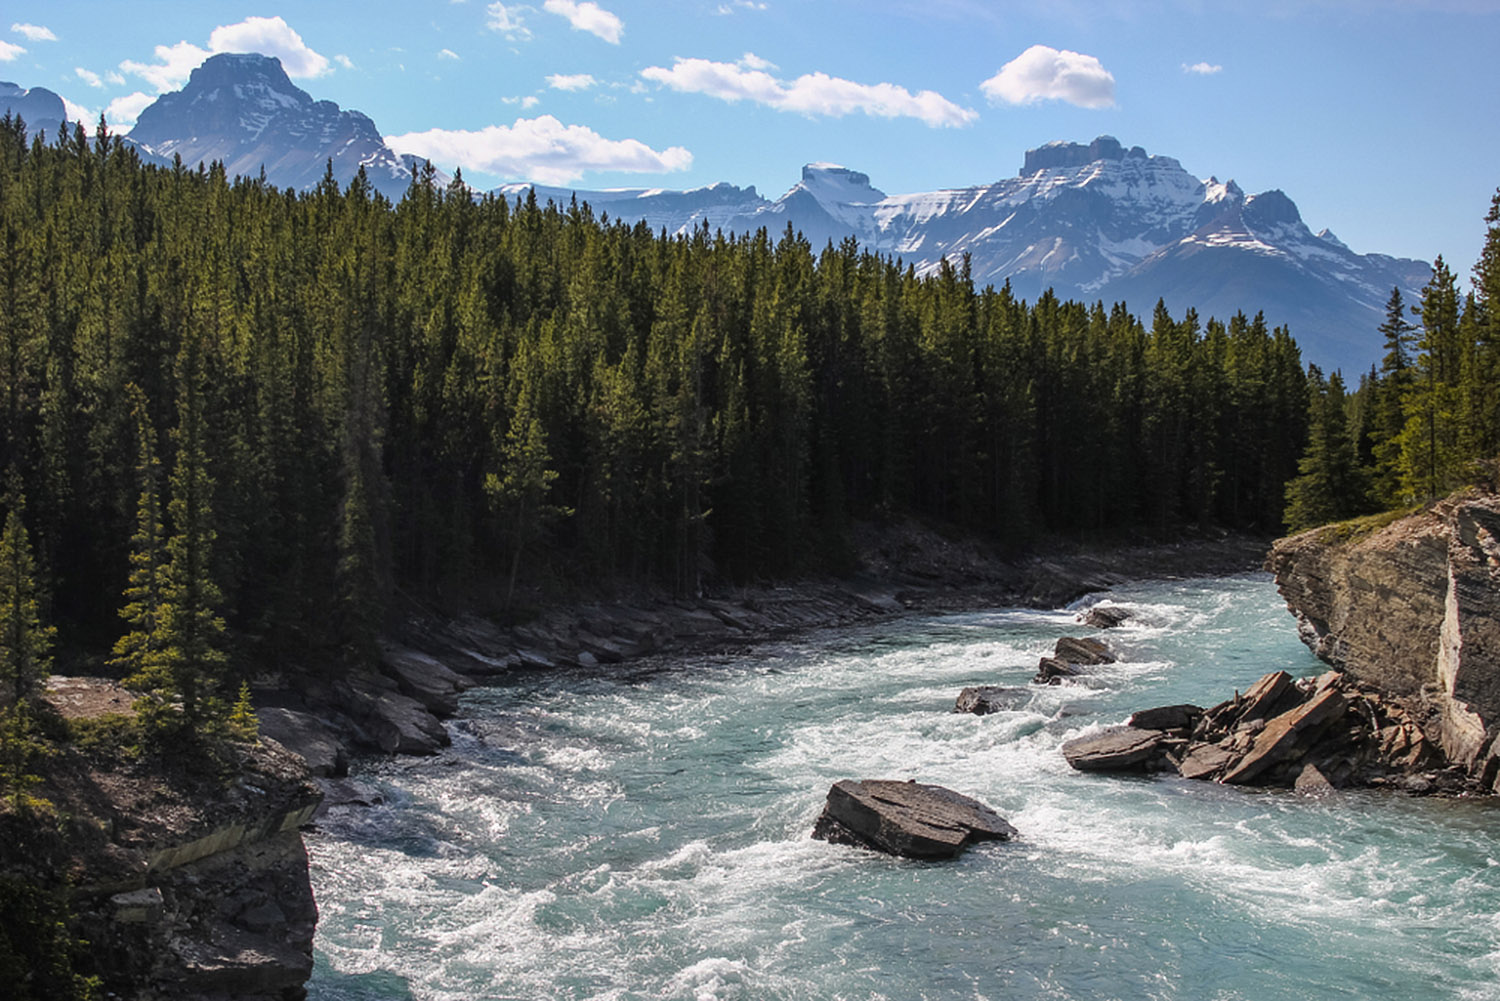 The global water crisis means scientists face urgent decisions on how to foster water managers’ care. Here, the North Saskatchewan River with the Rocky Mountains, Banff National Park. (Photo: Shutterstock)